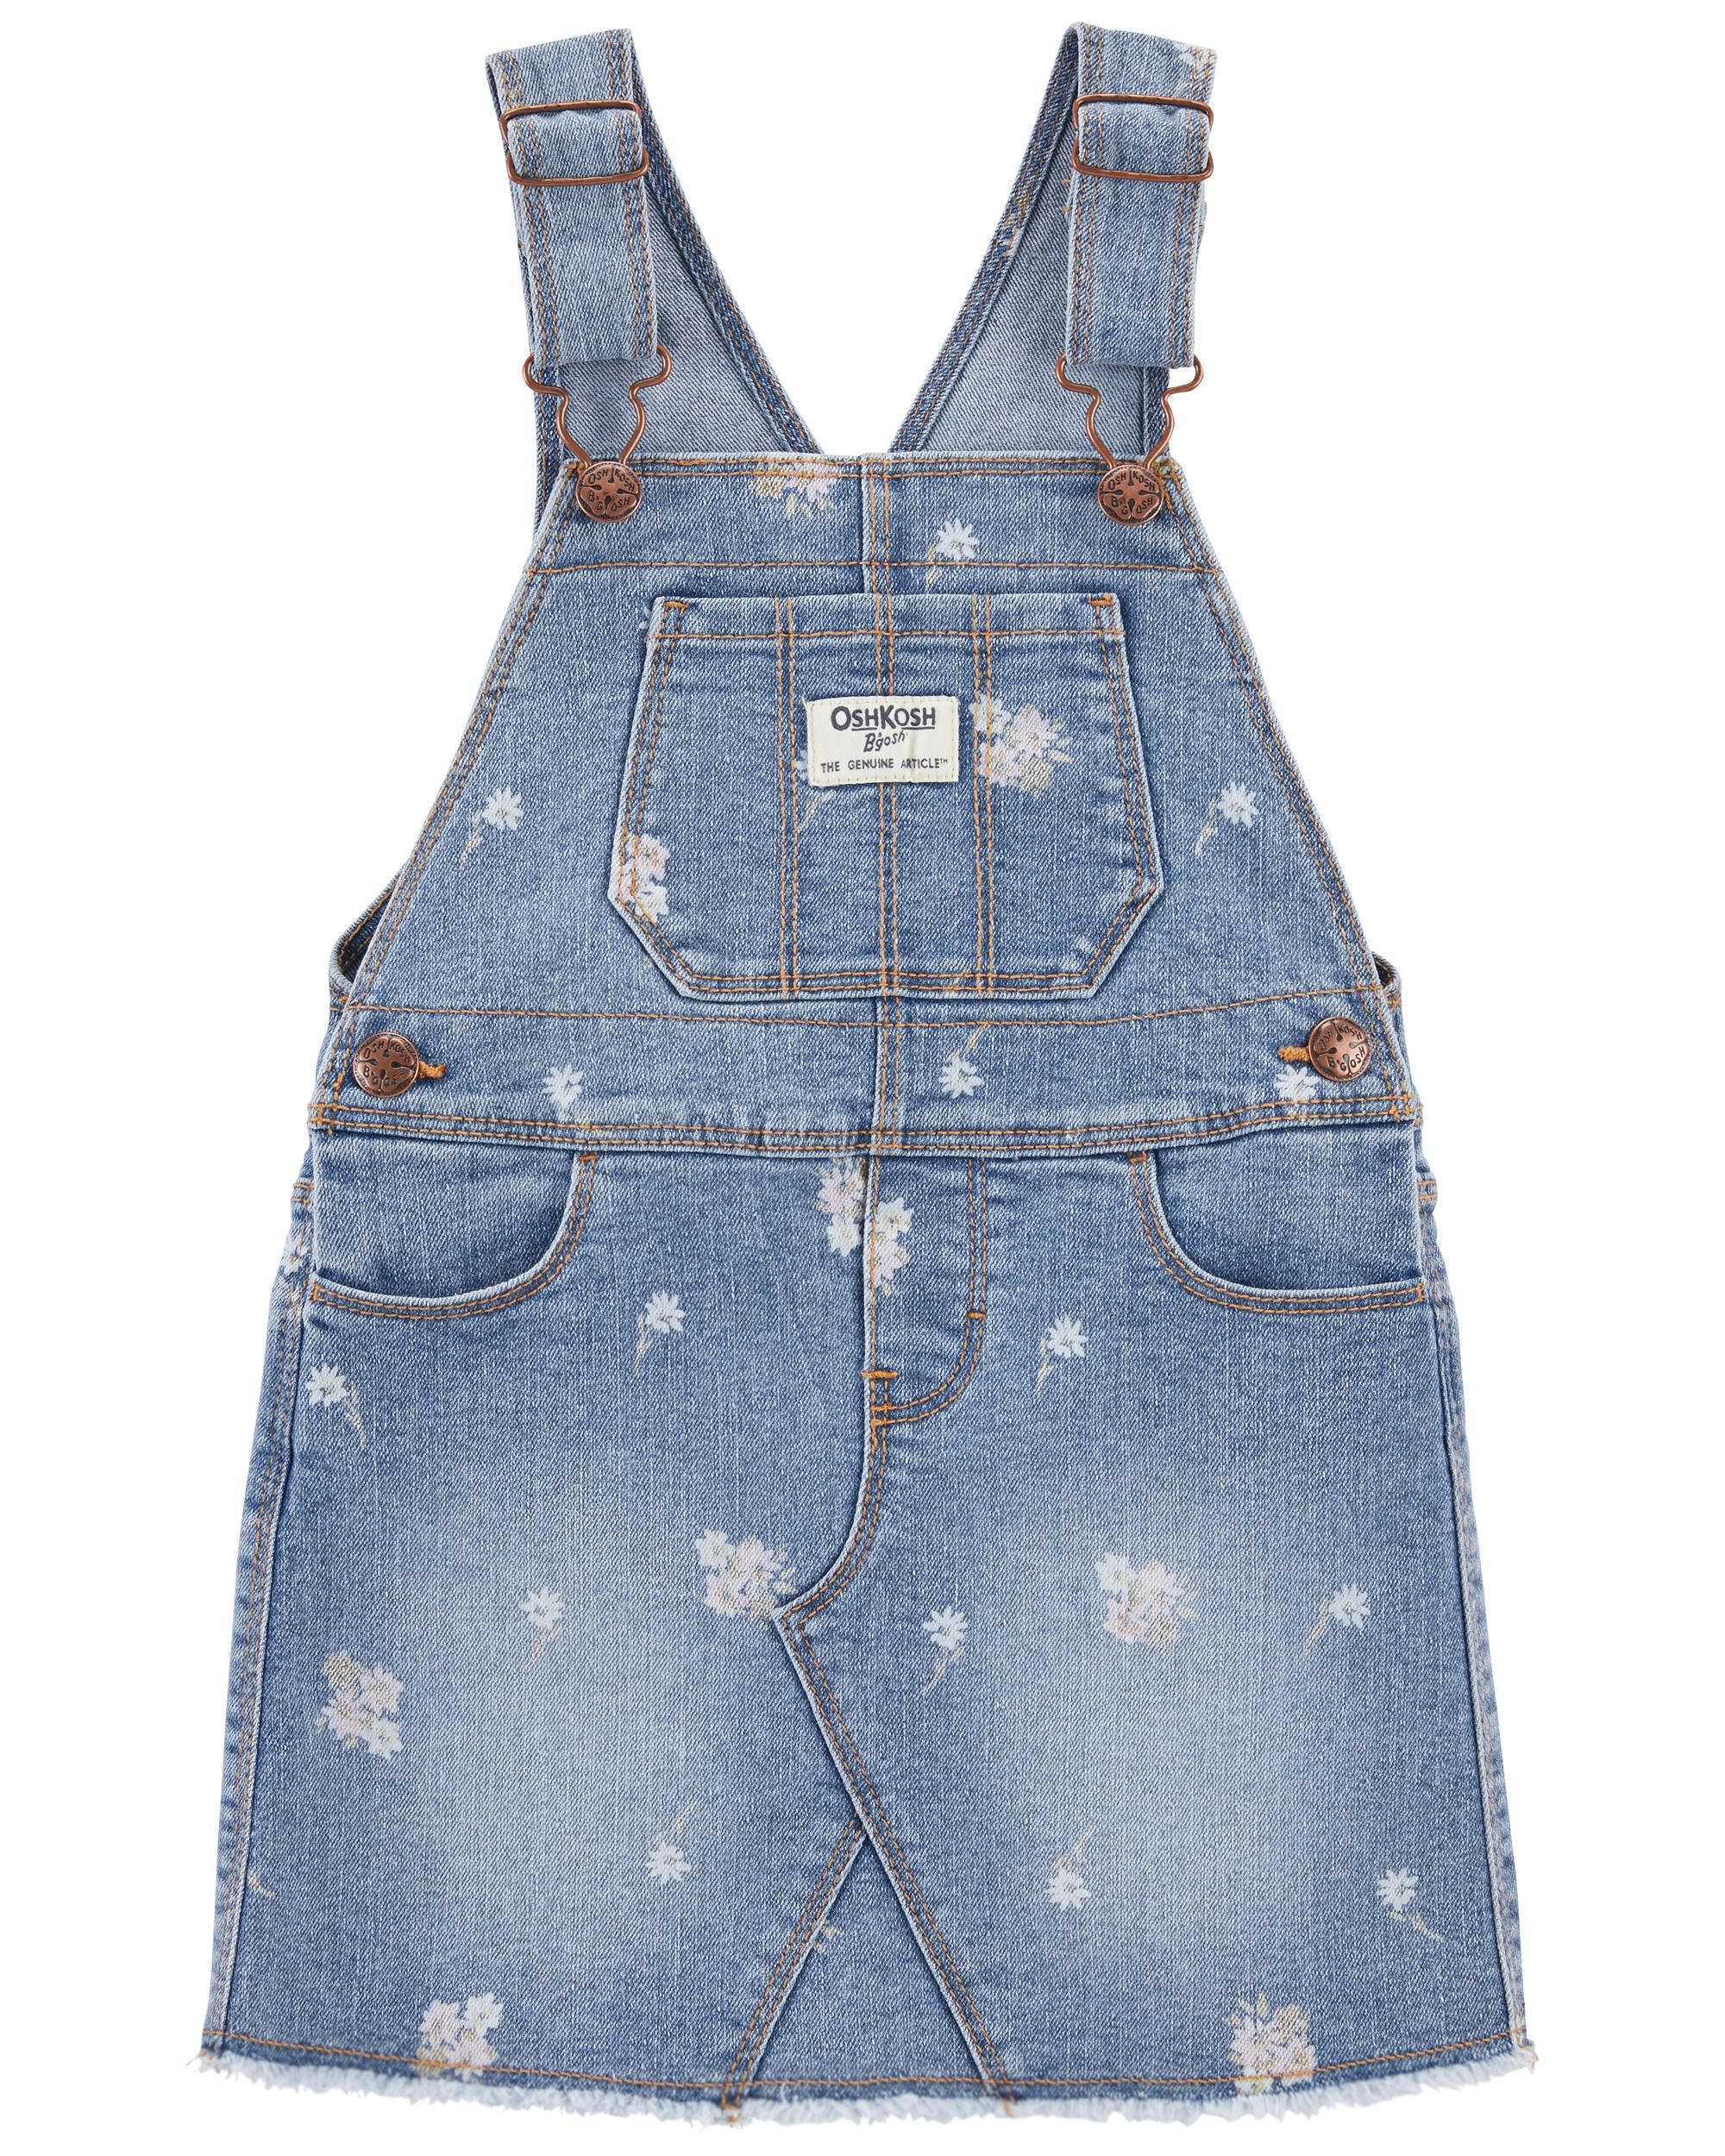 Shop All Toddler Girl: Overalls | Carter's | Free Shipping